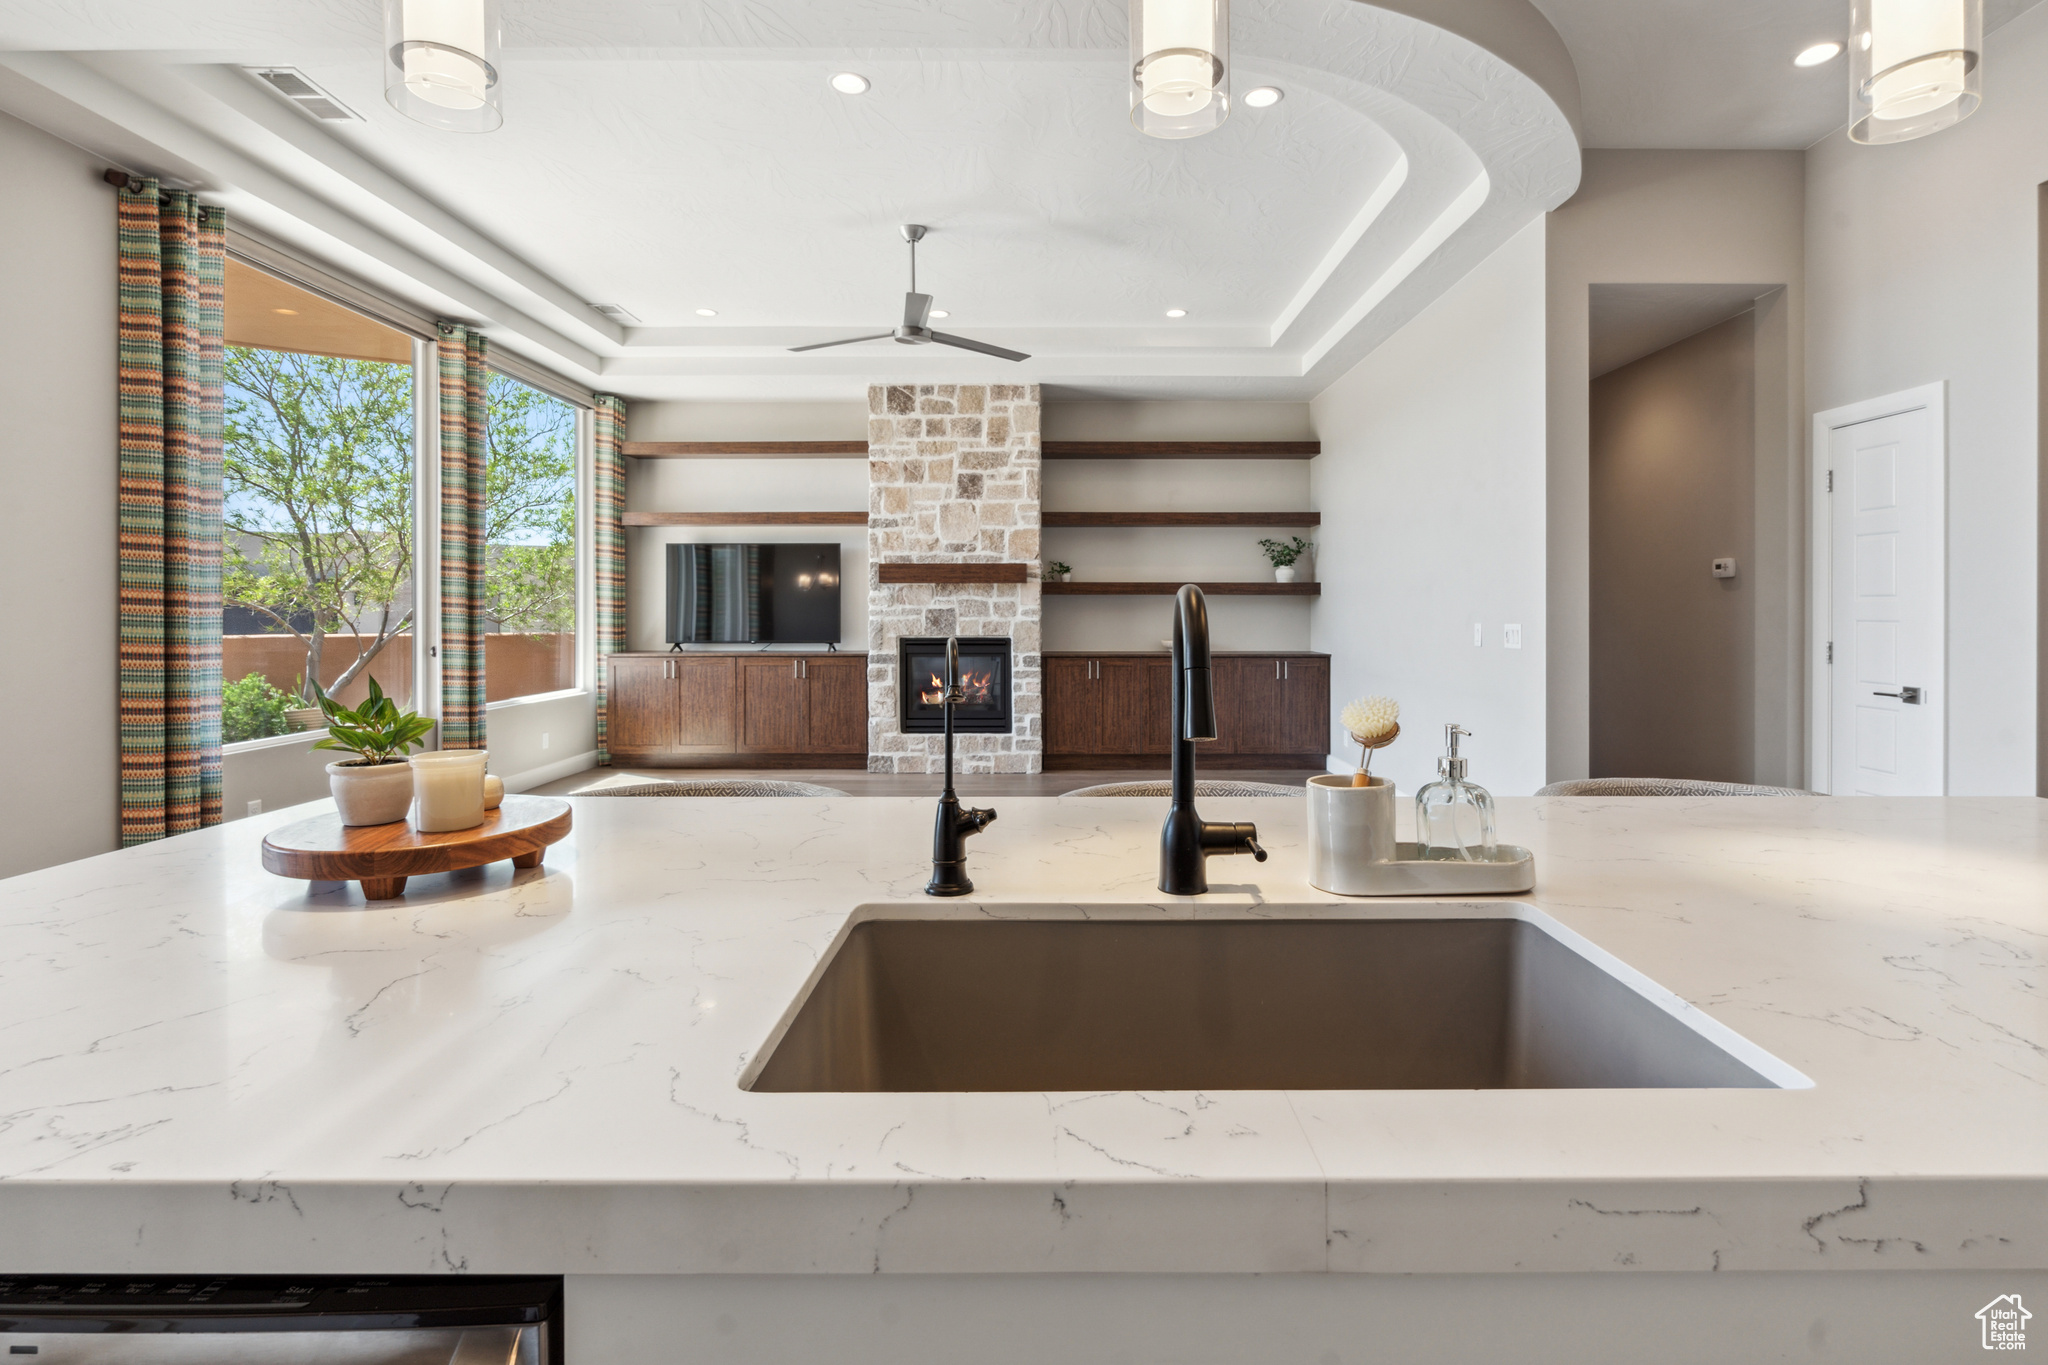 Kitchen with ceiling fan, light stone counters, a fireplace, sink, and pendant lighting